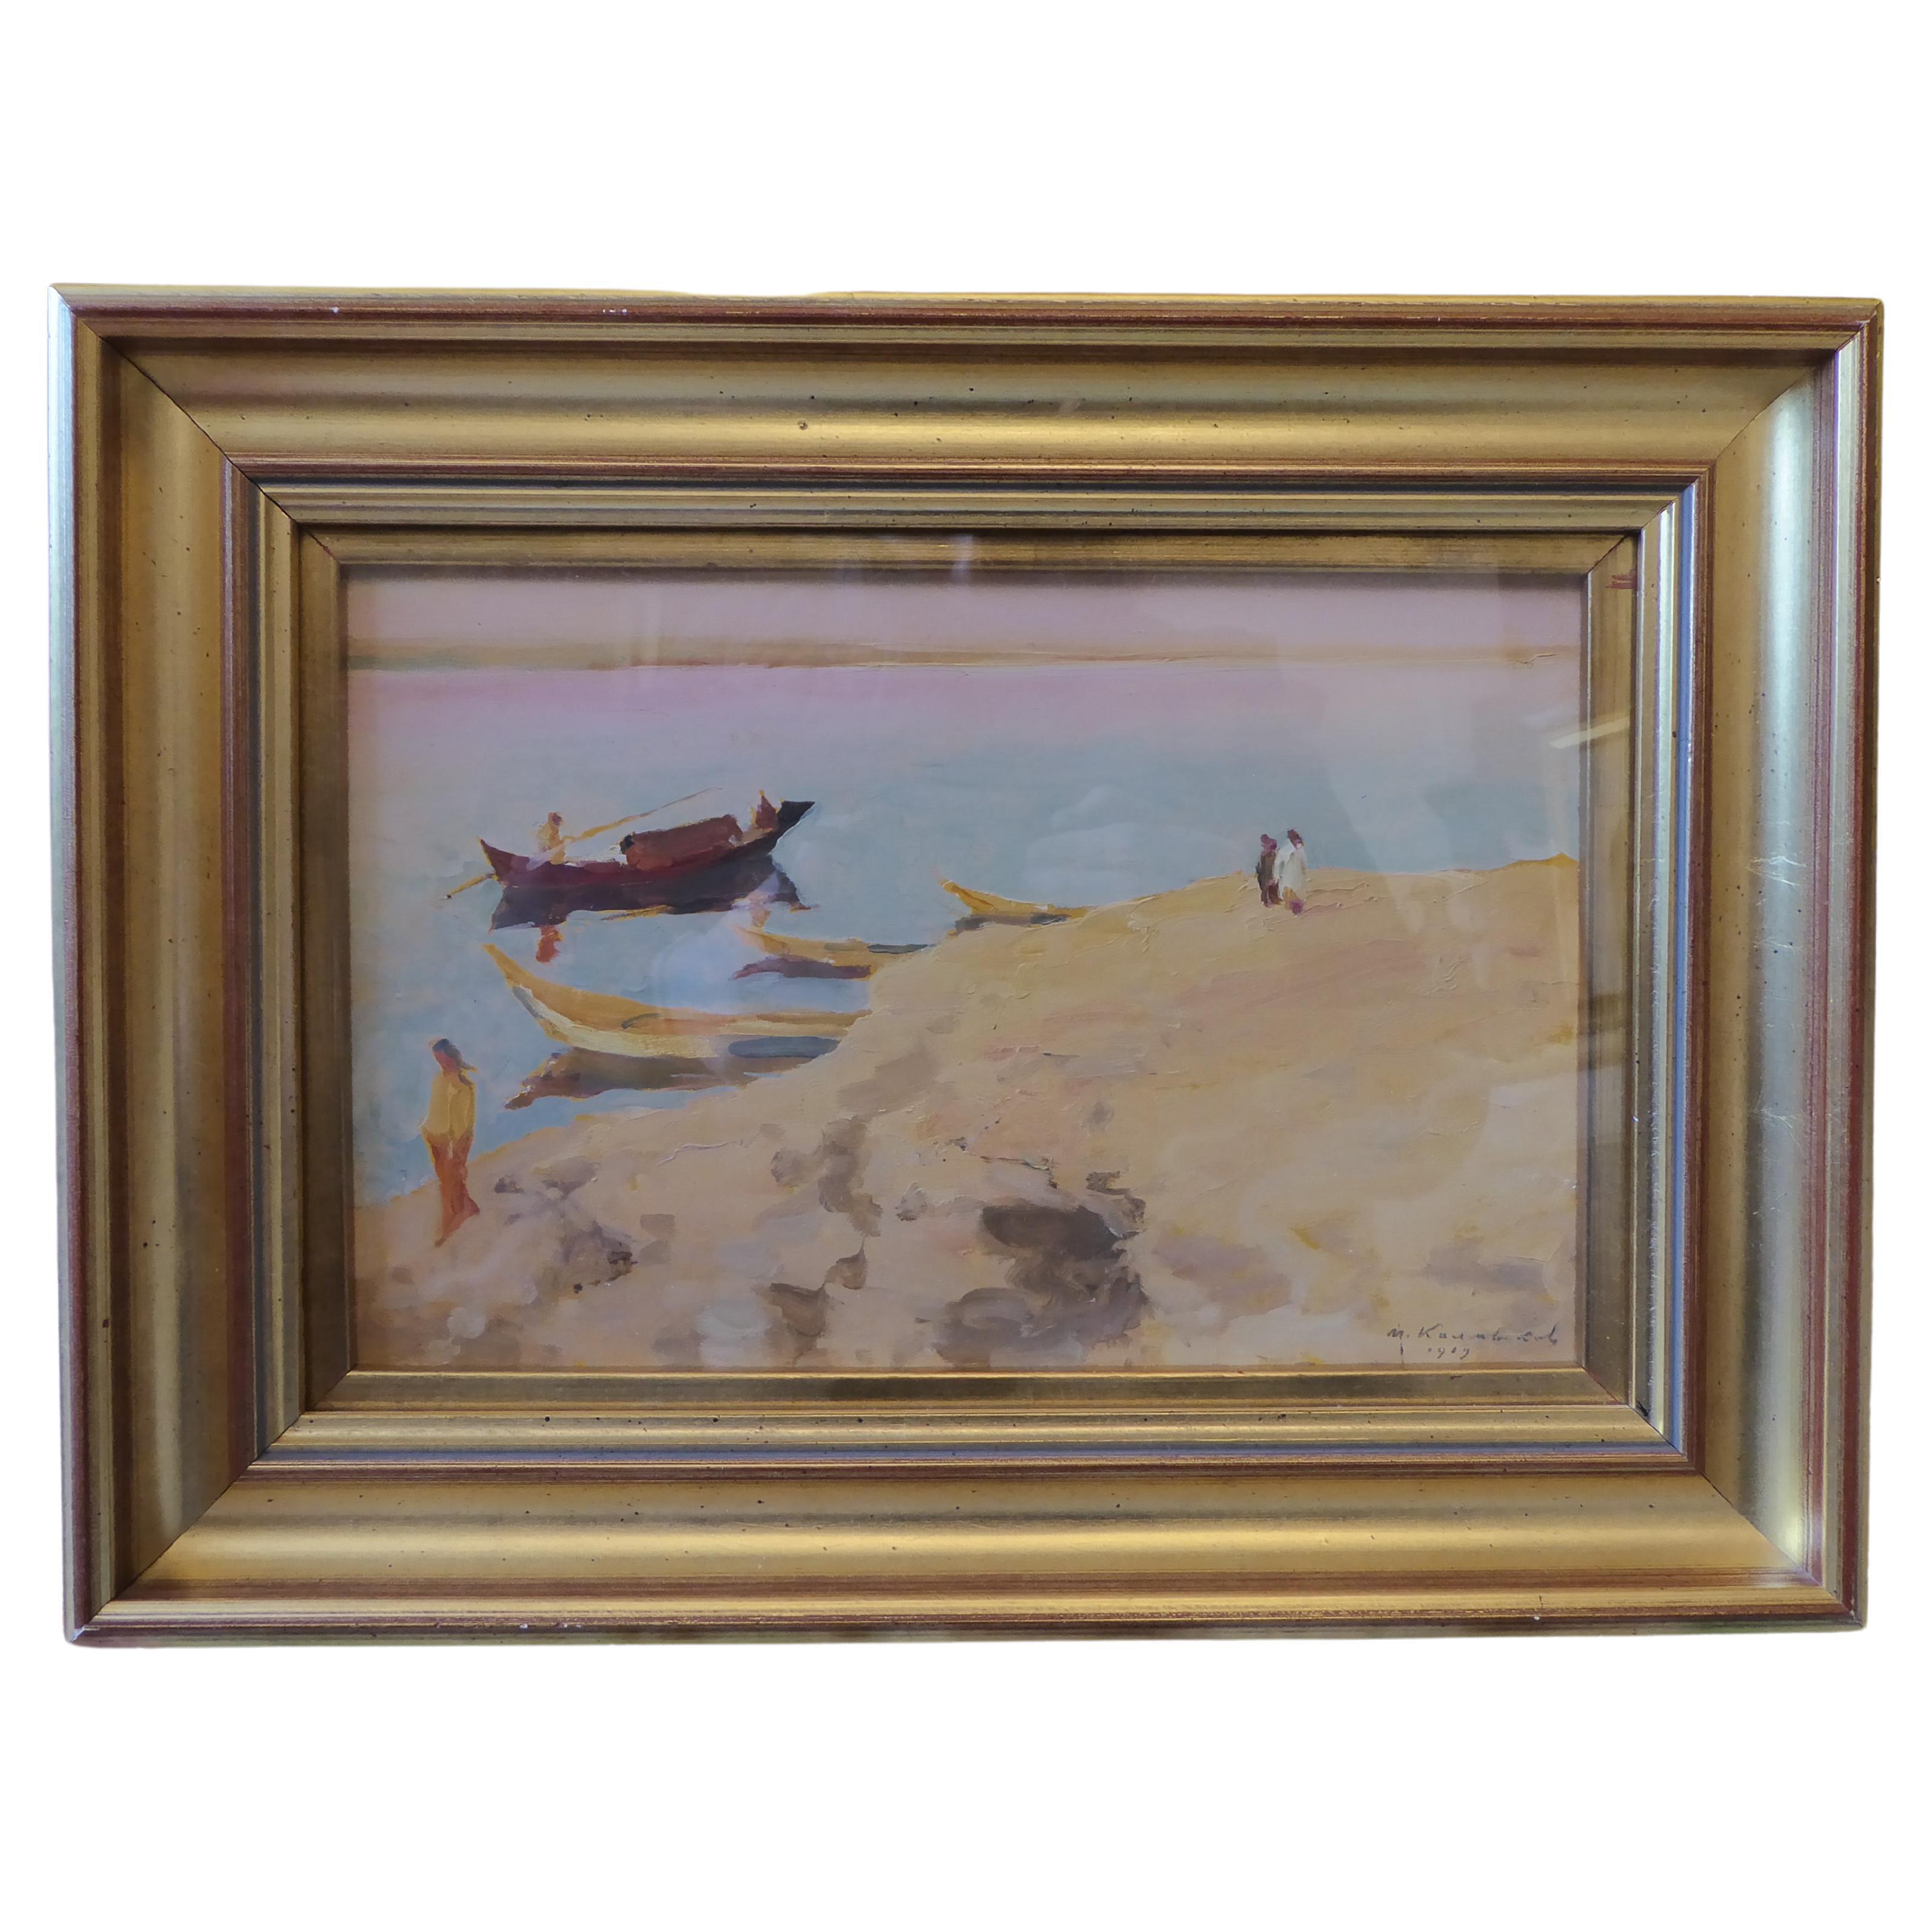 Midle eastern picture , Delightful subject matter  with craft off shore with oar